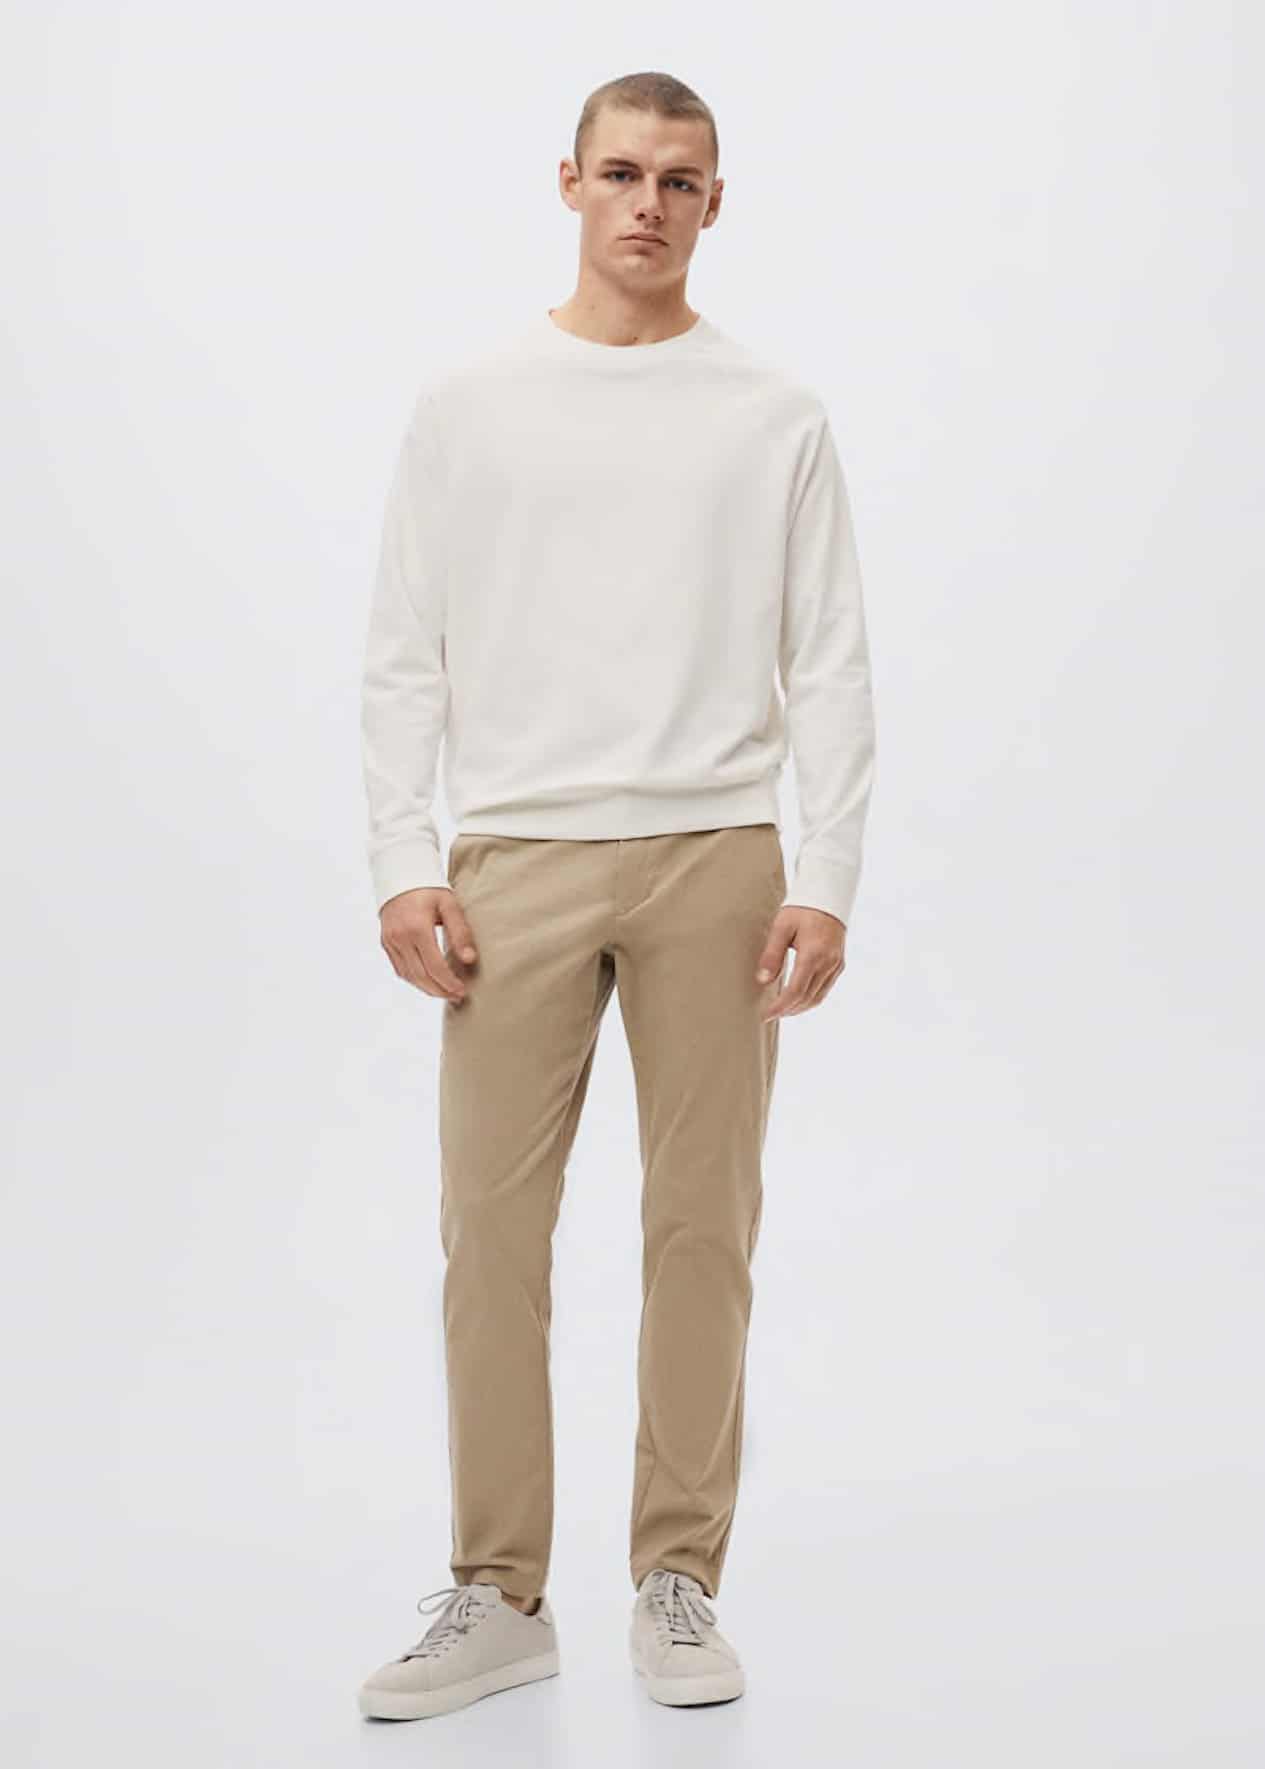 image of a man wearing an ivory sweater, tan khaki pants, and white sneakers